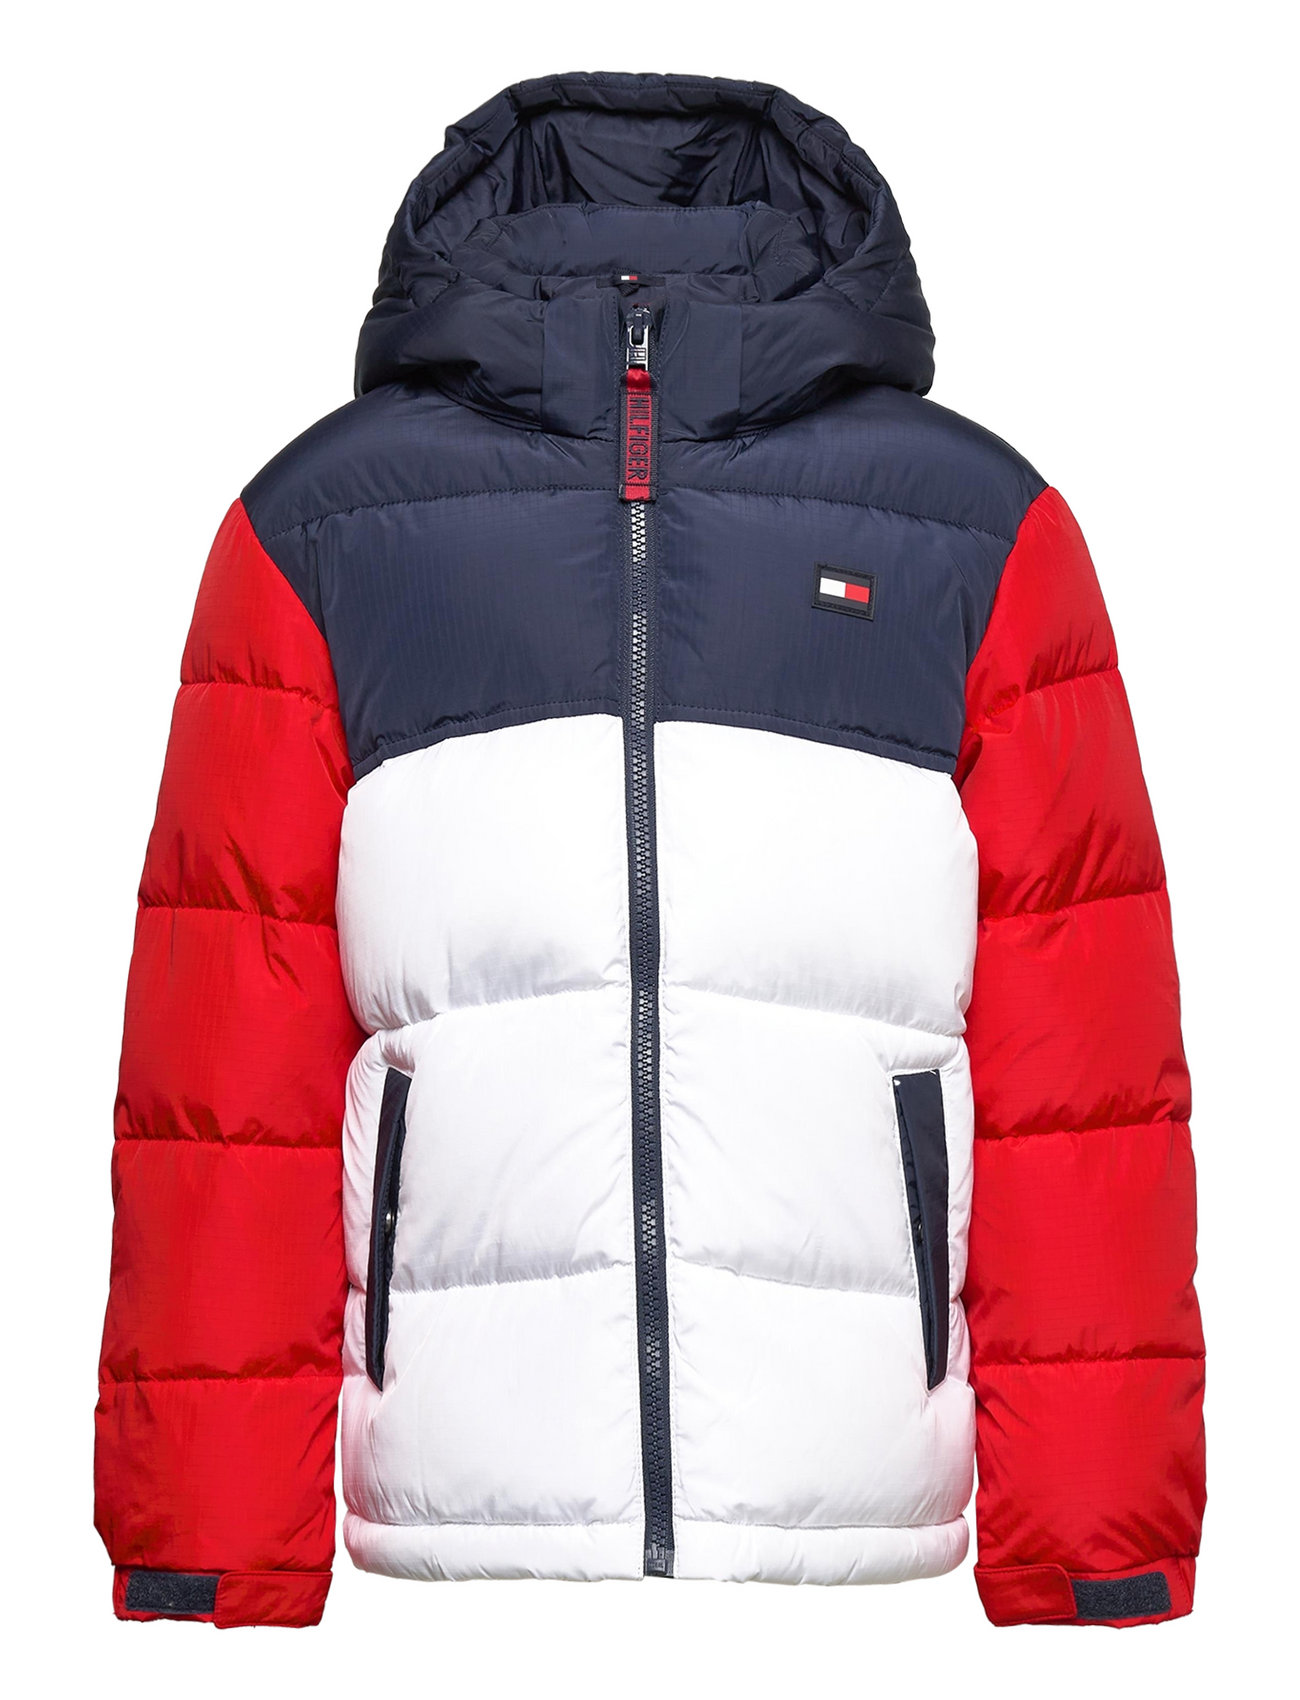 poeder krom kool Tommy Hilfiger Alaska Colourblock Puffer Jacket - 143.94 €. Buy Puffer &  Padded from Tommy Hilfiger online at Boozt.com. Fast delivery and easy  returns